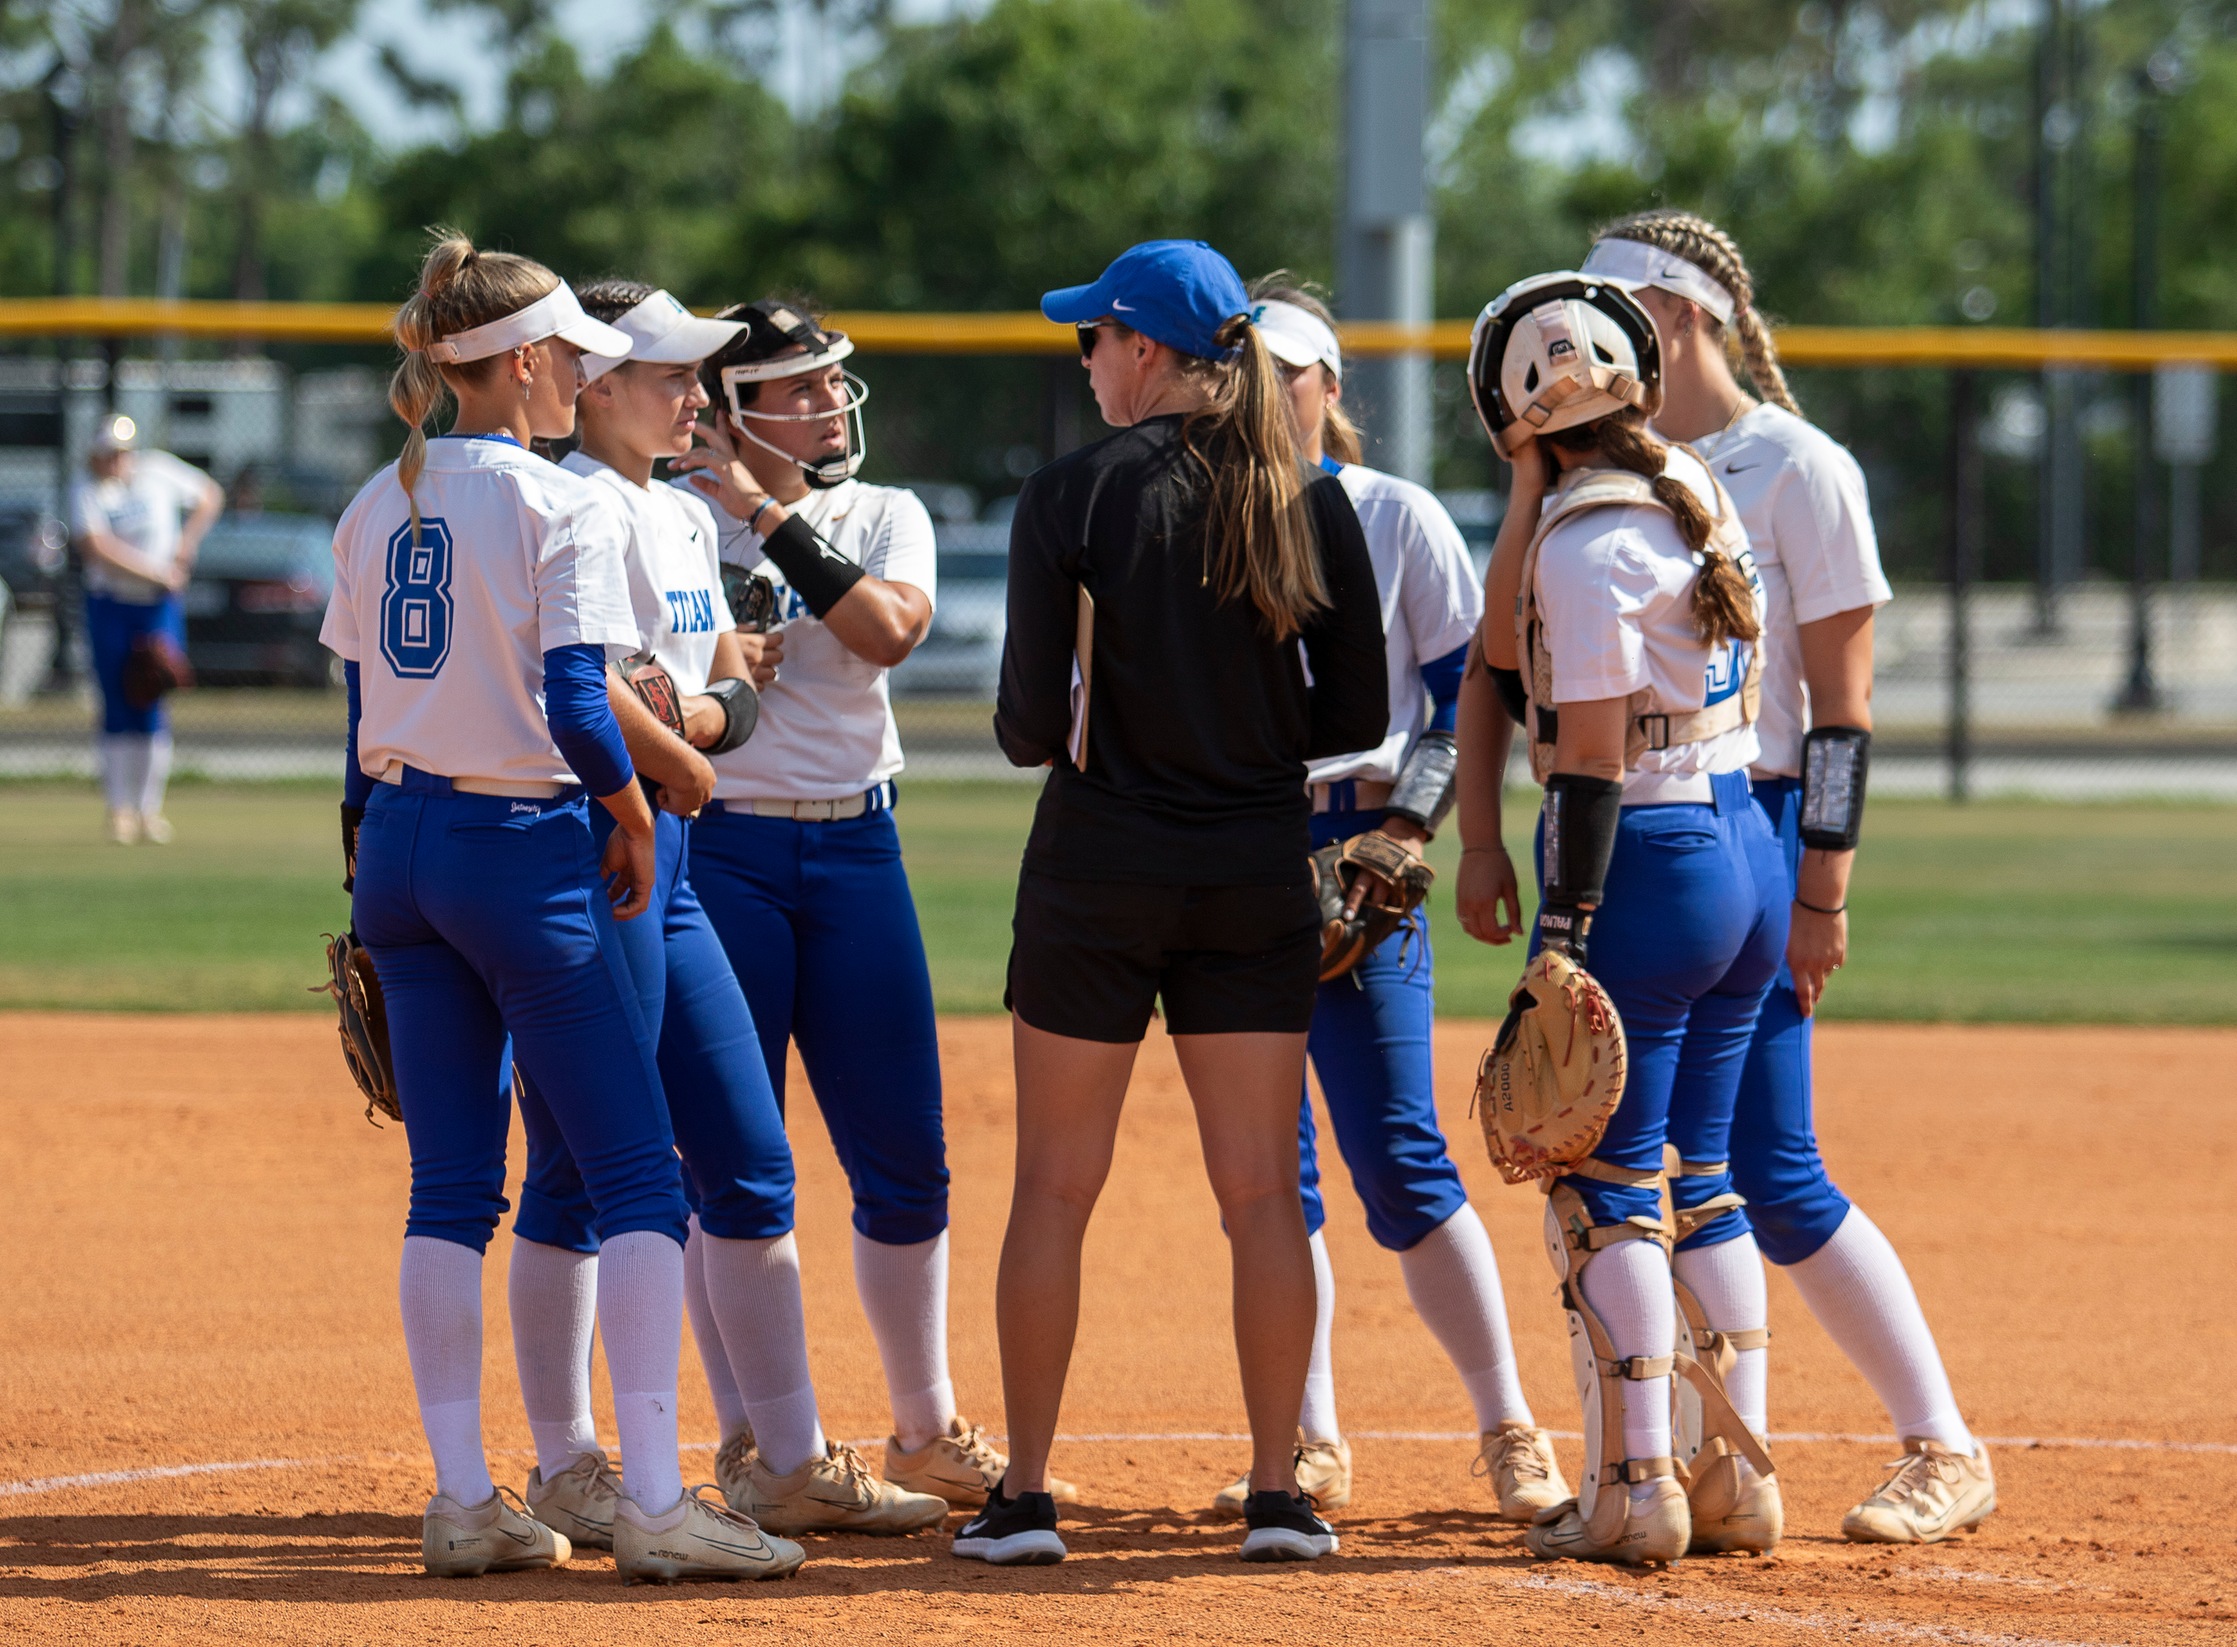 Thursday's softball doubleheader moved to April 18